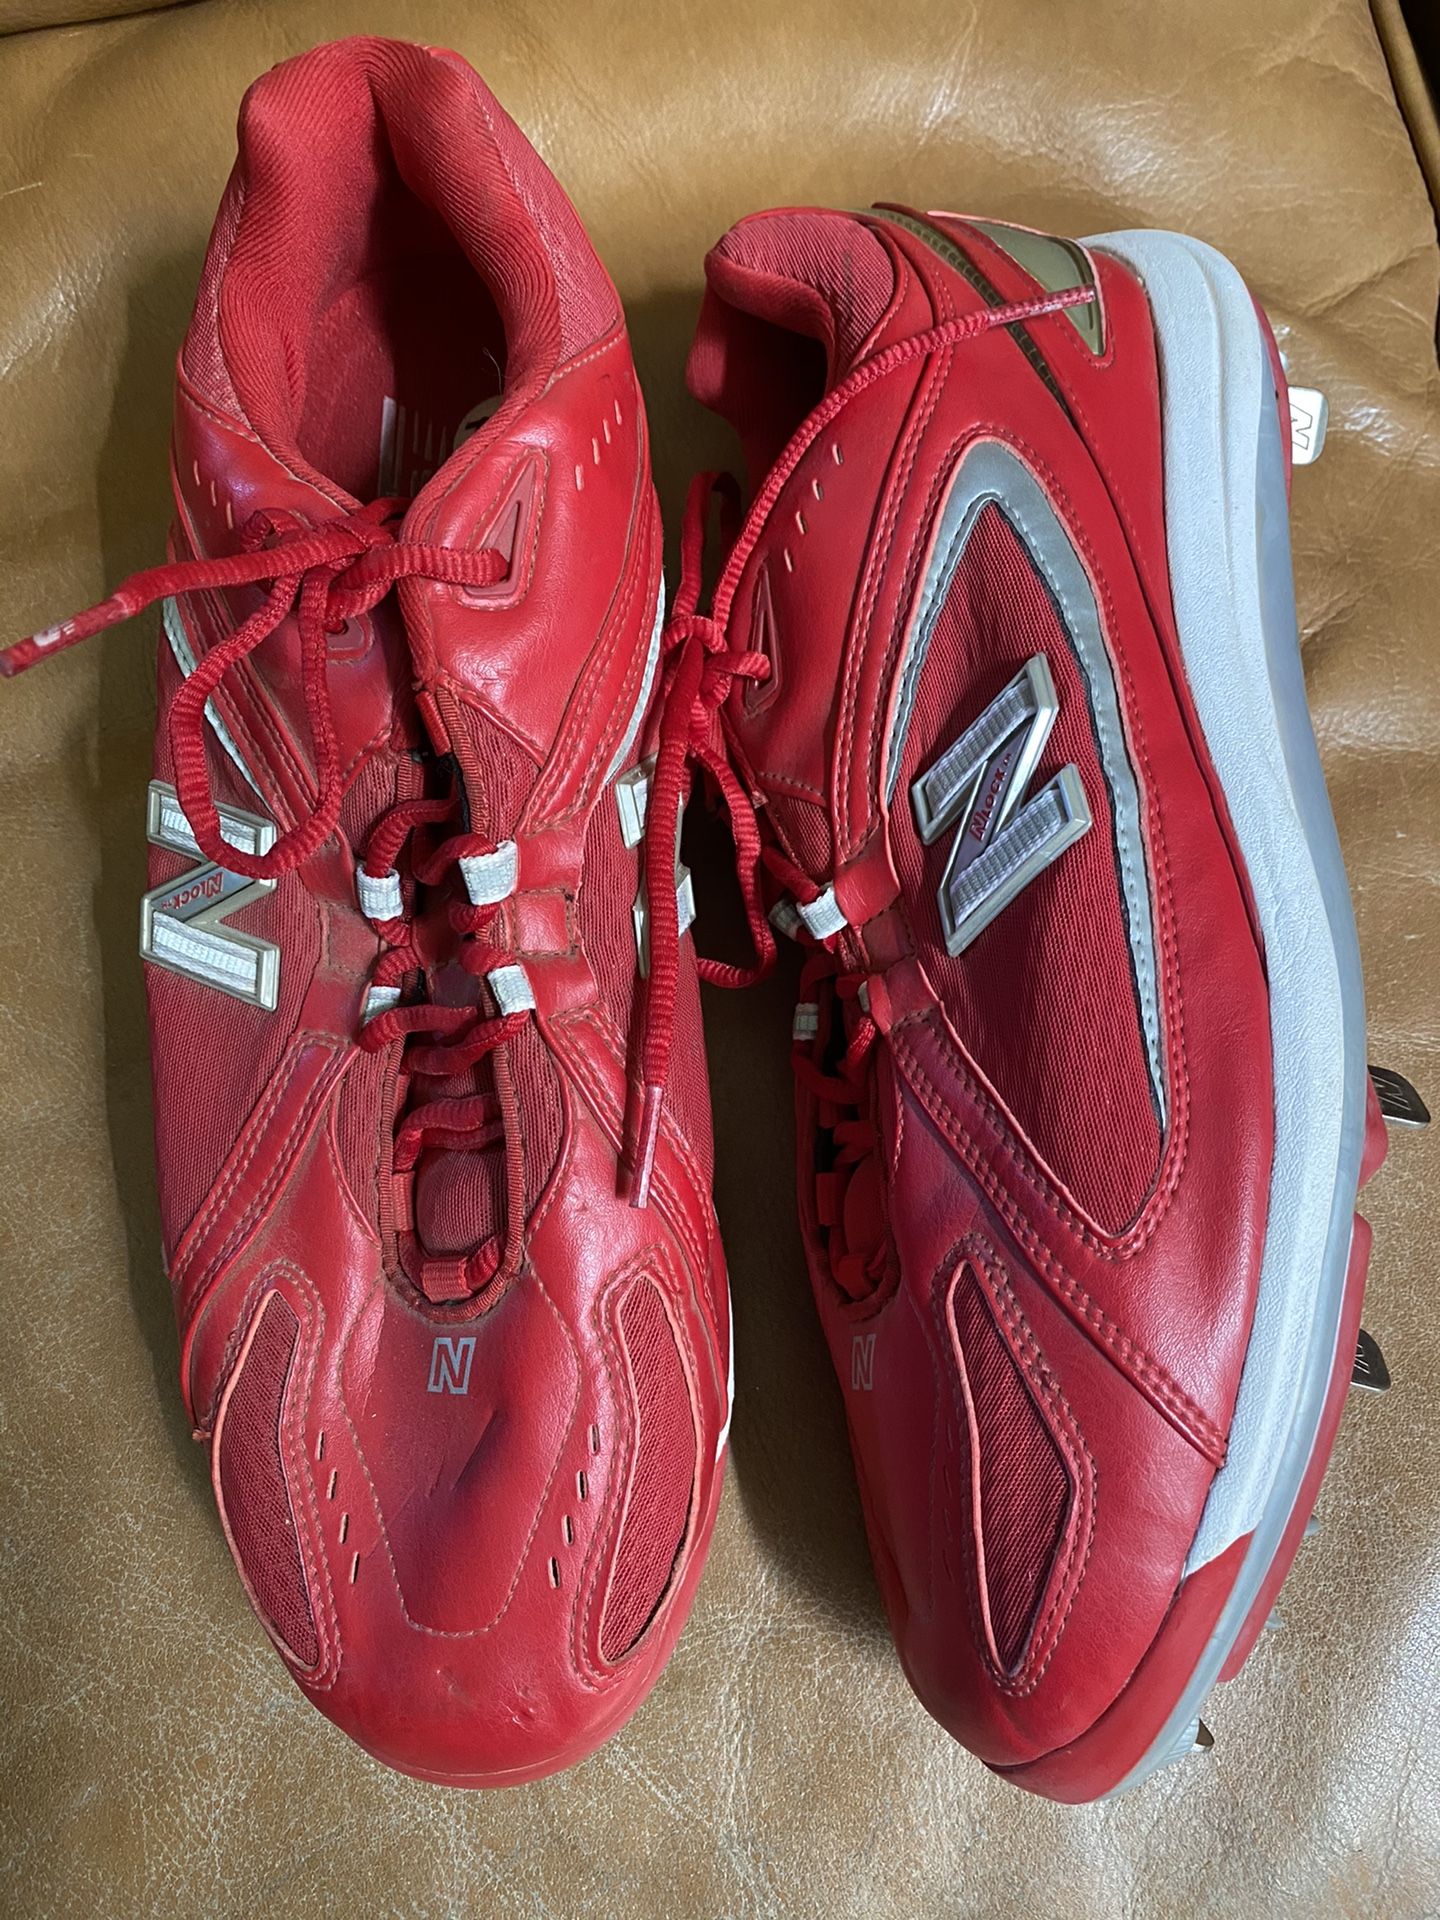 Men’s Red Leather Metal Cleats Shoes Size 12 1/2